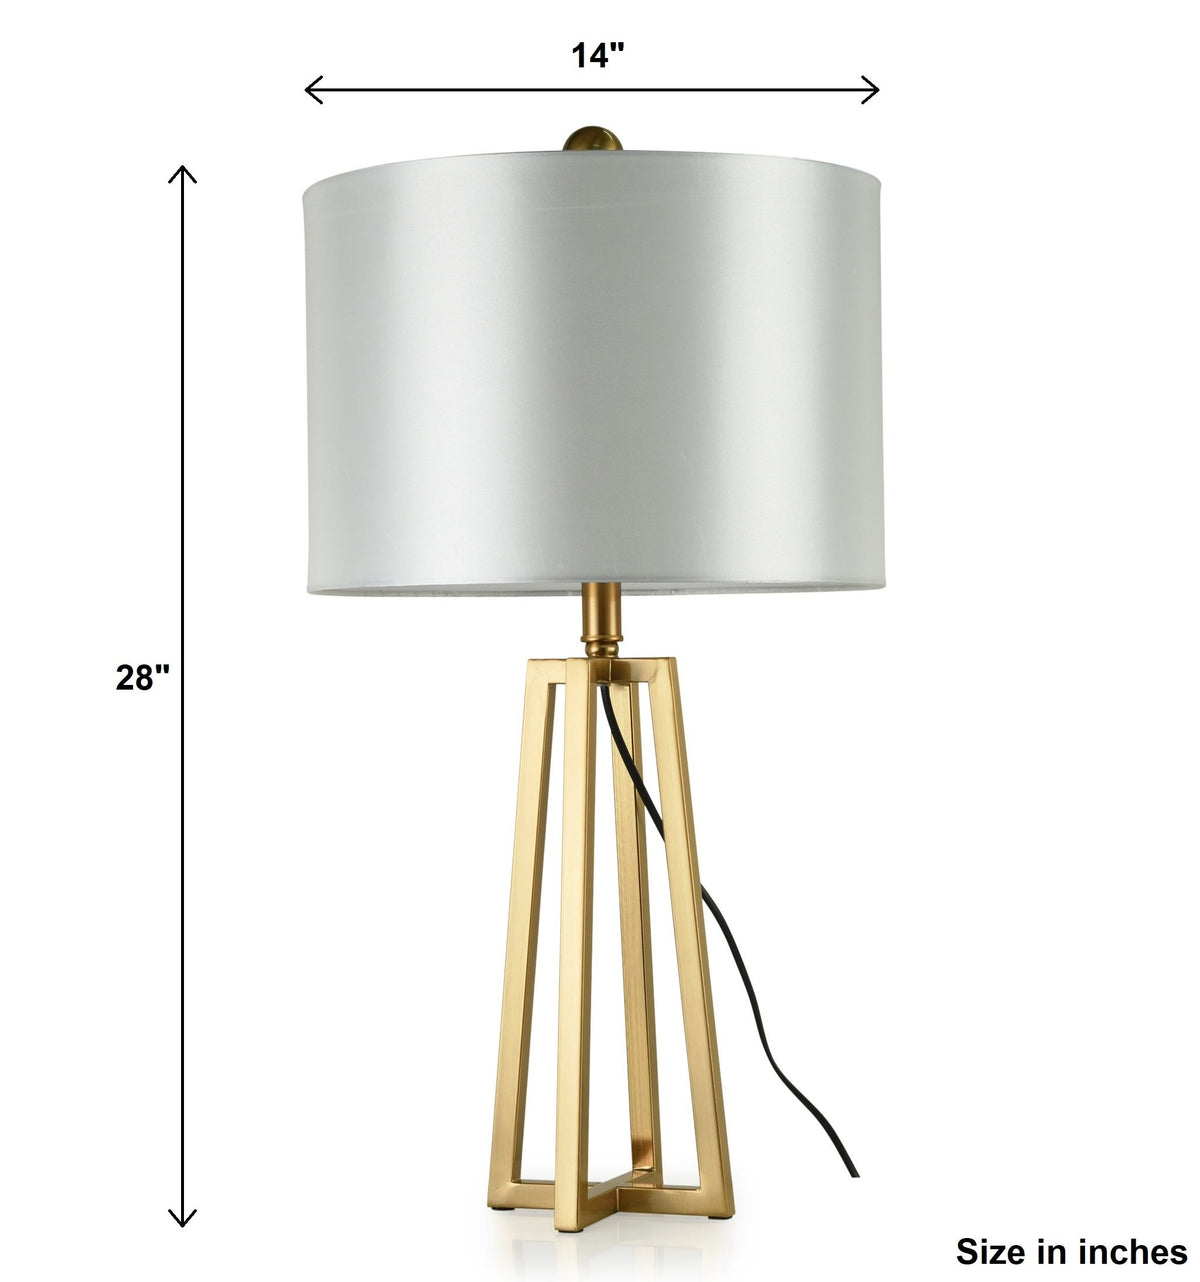 Fab Table Lamp Online India